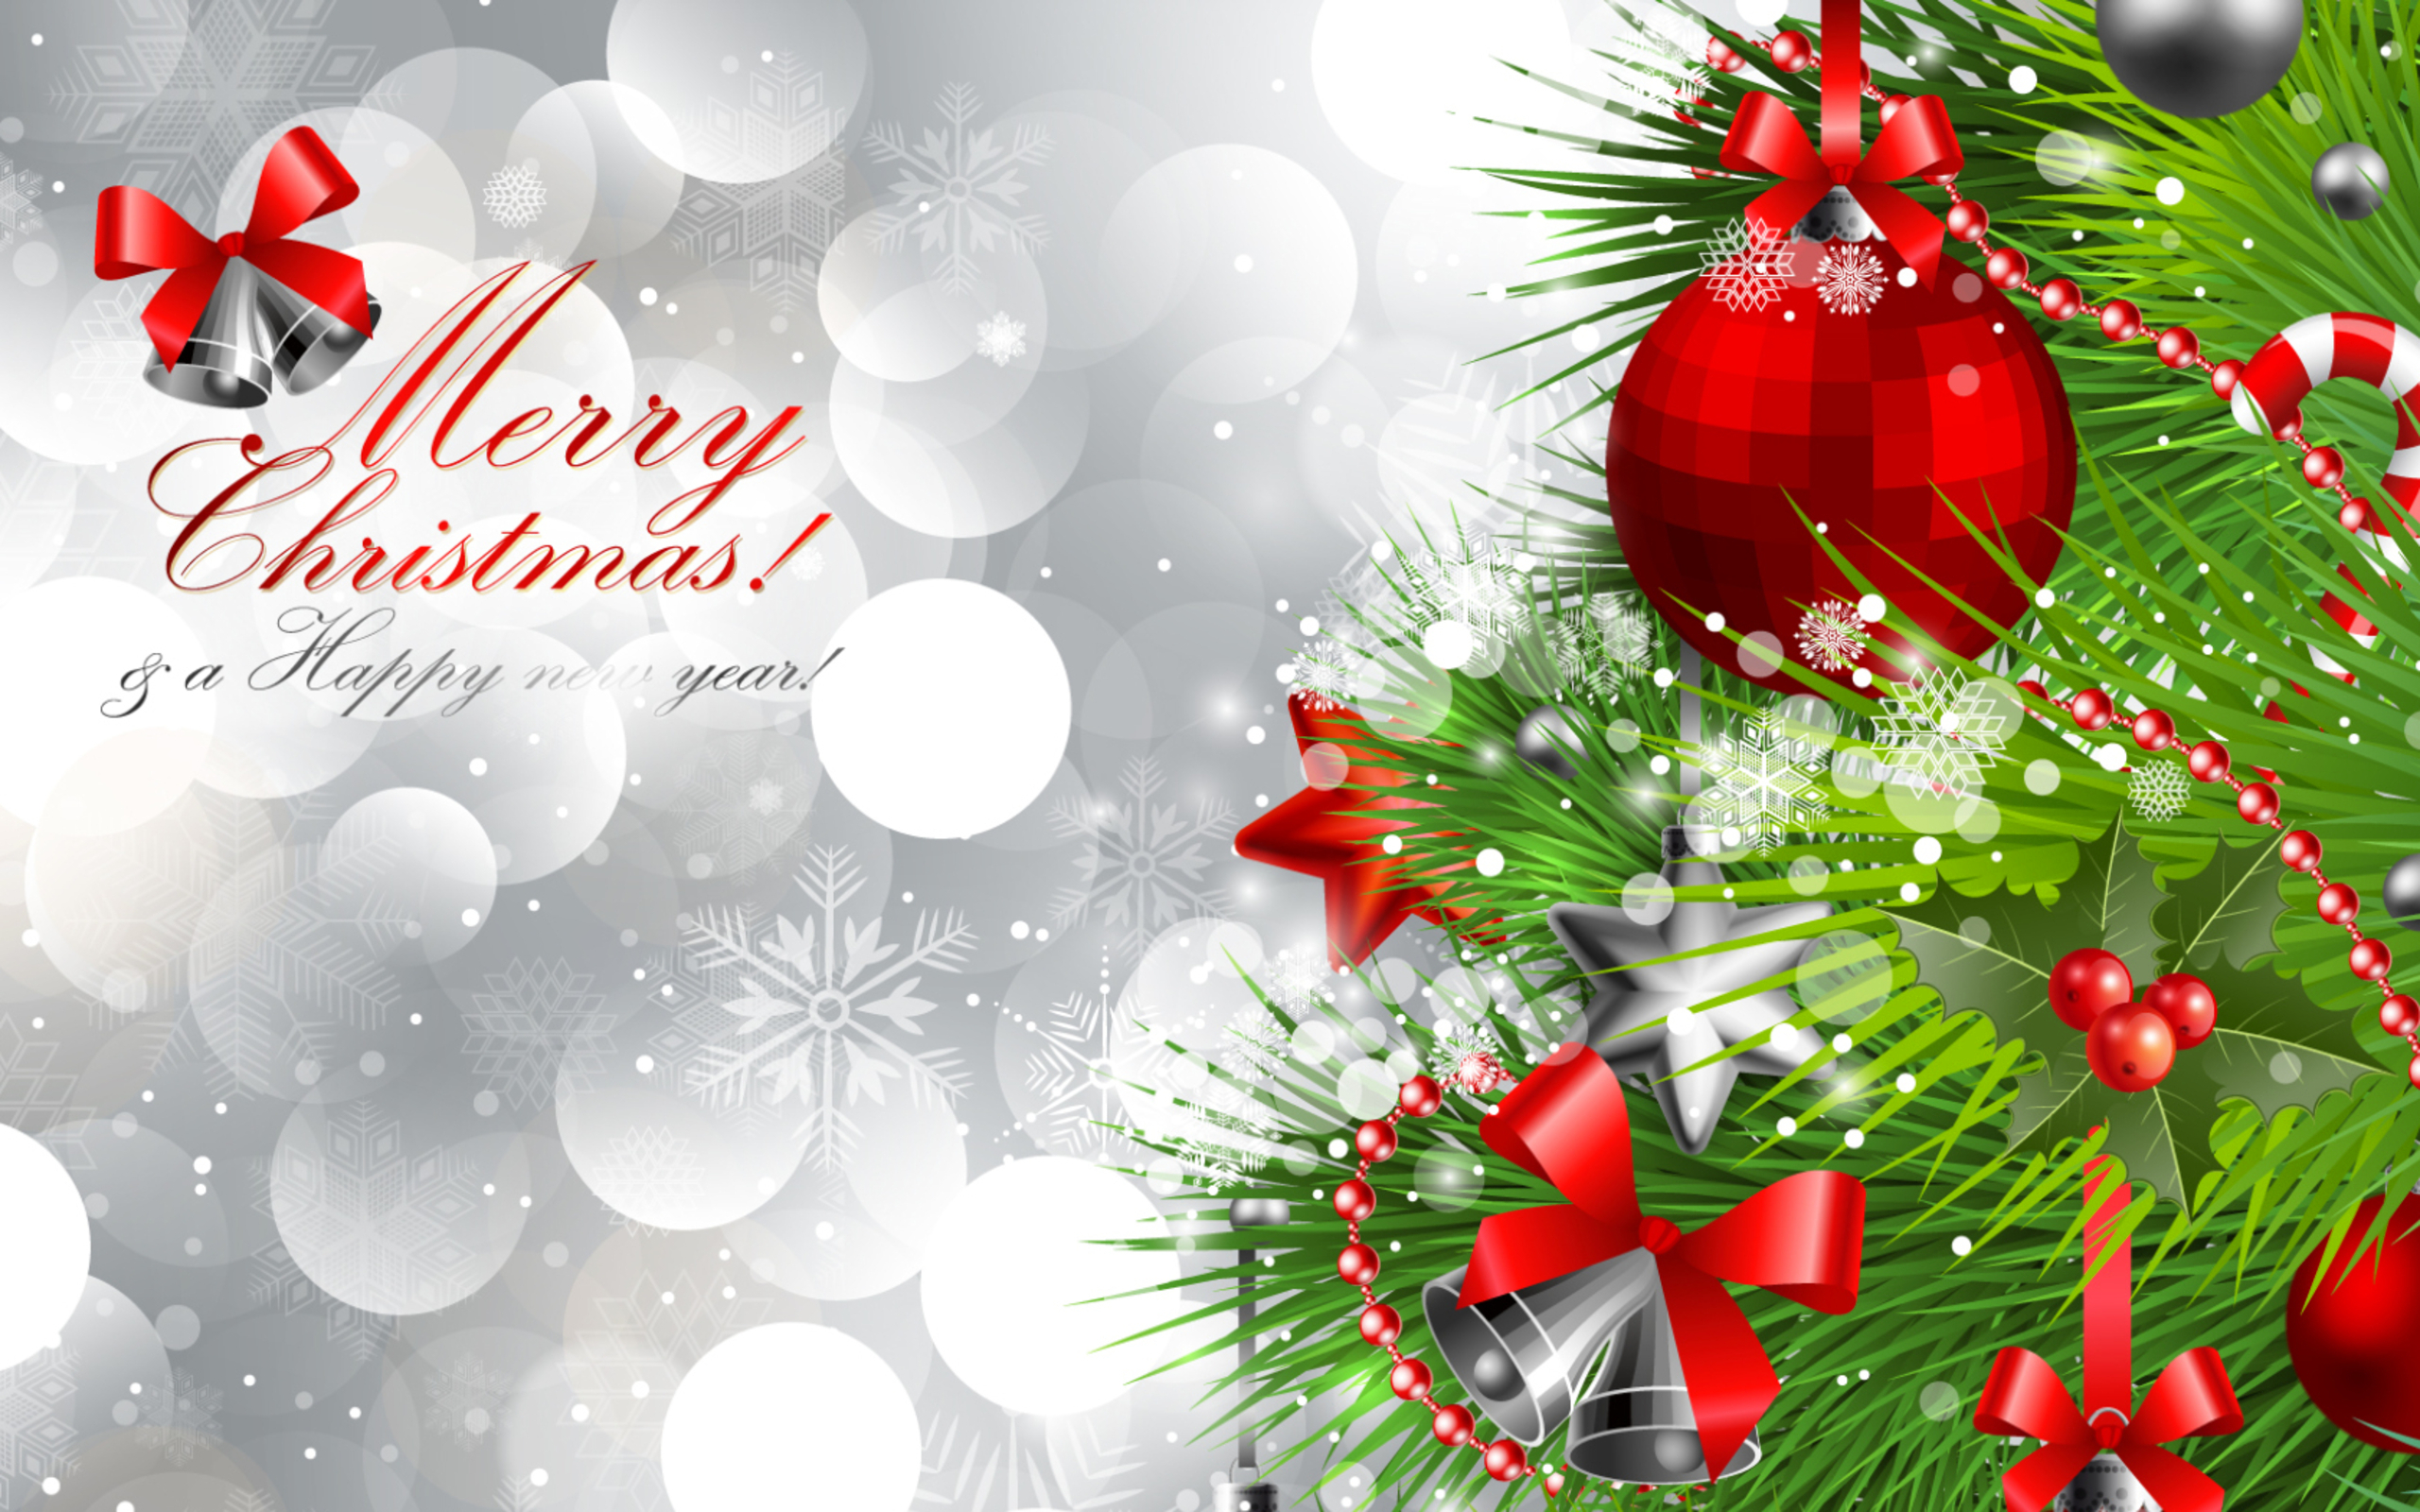 Merry Christmas And Happy New Year Silver Background Quality Image And Transparent PNG Free Clipart